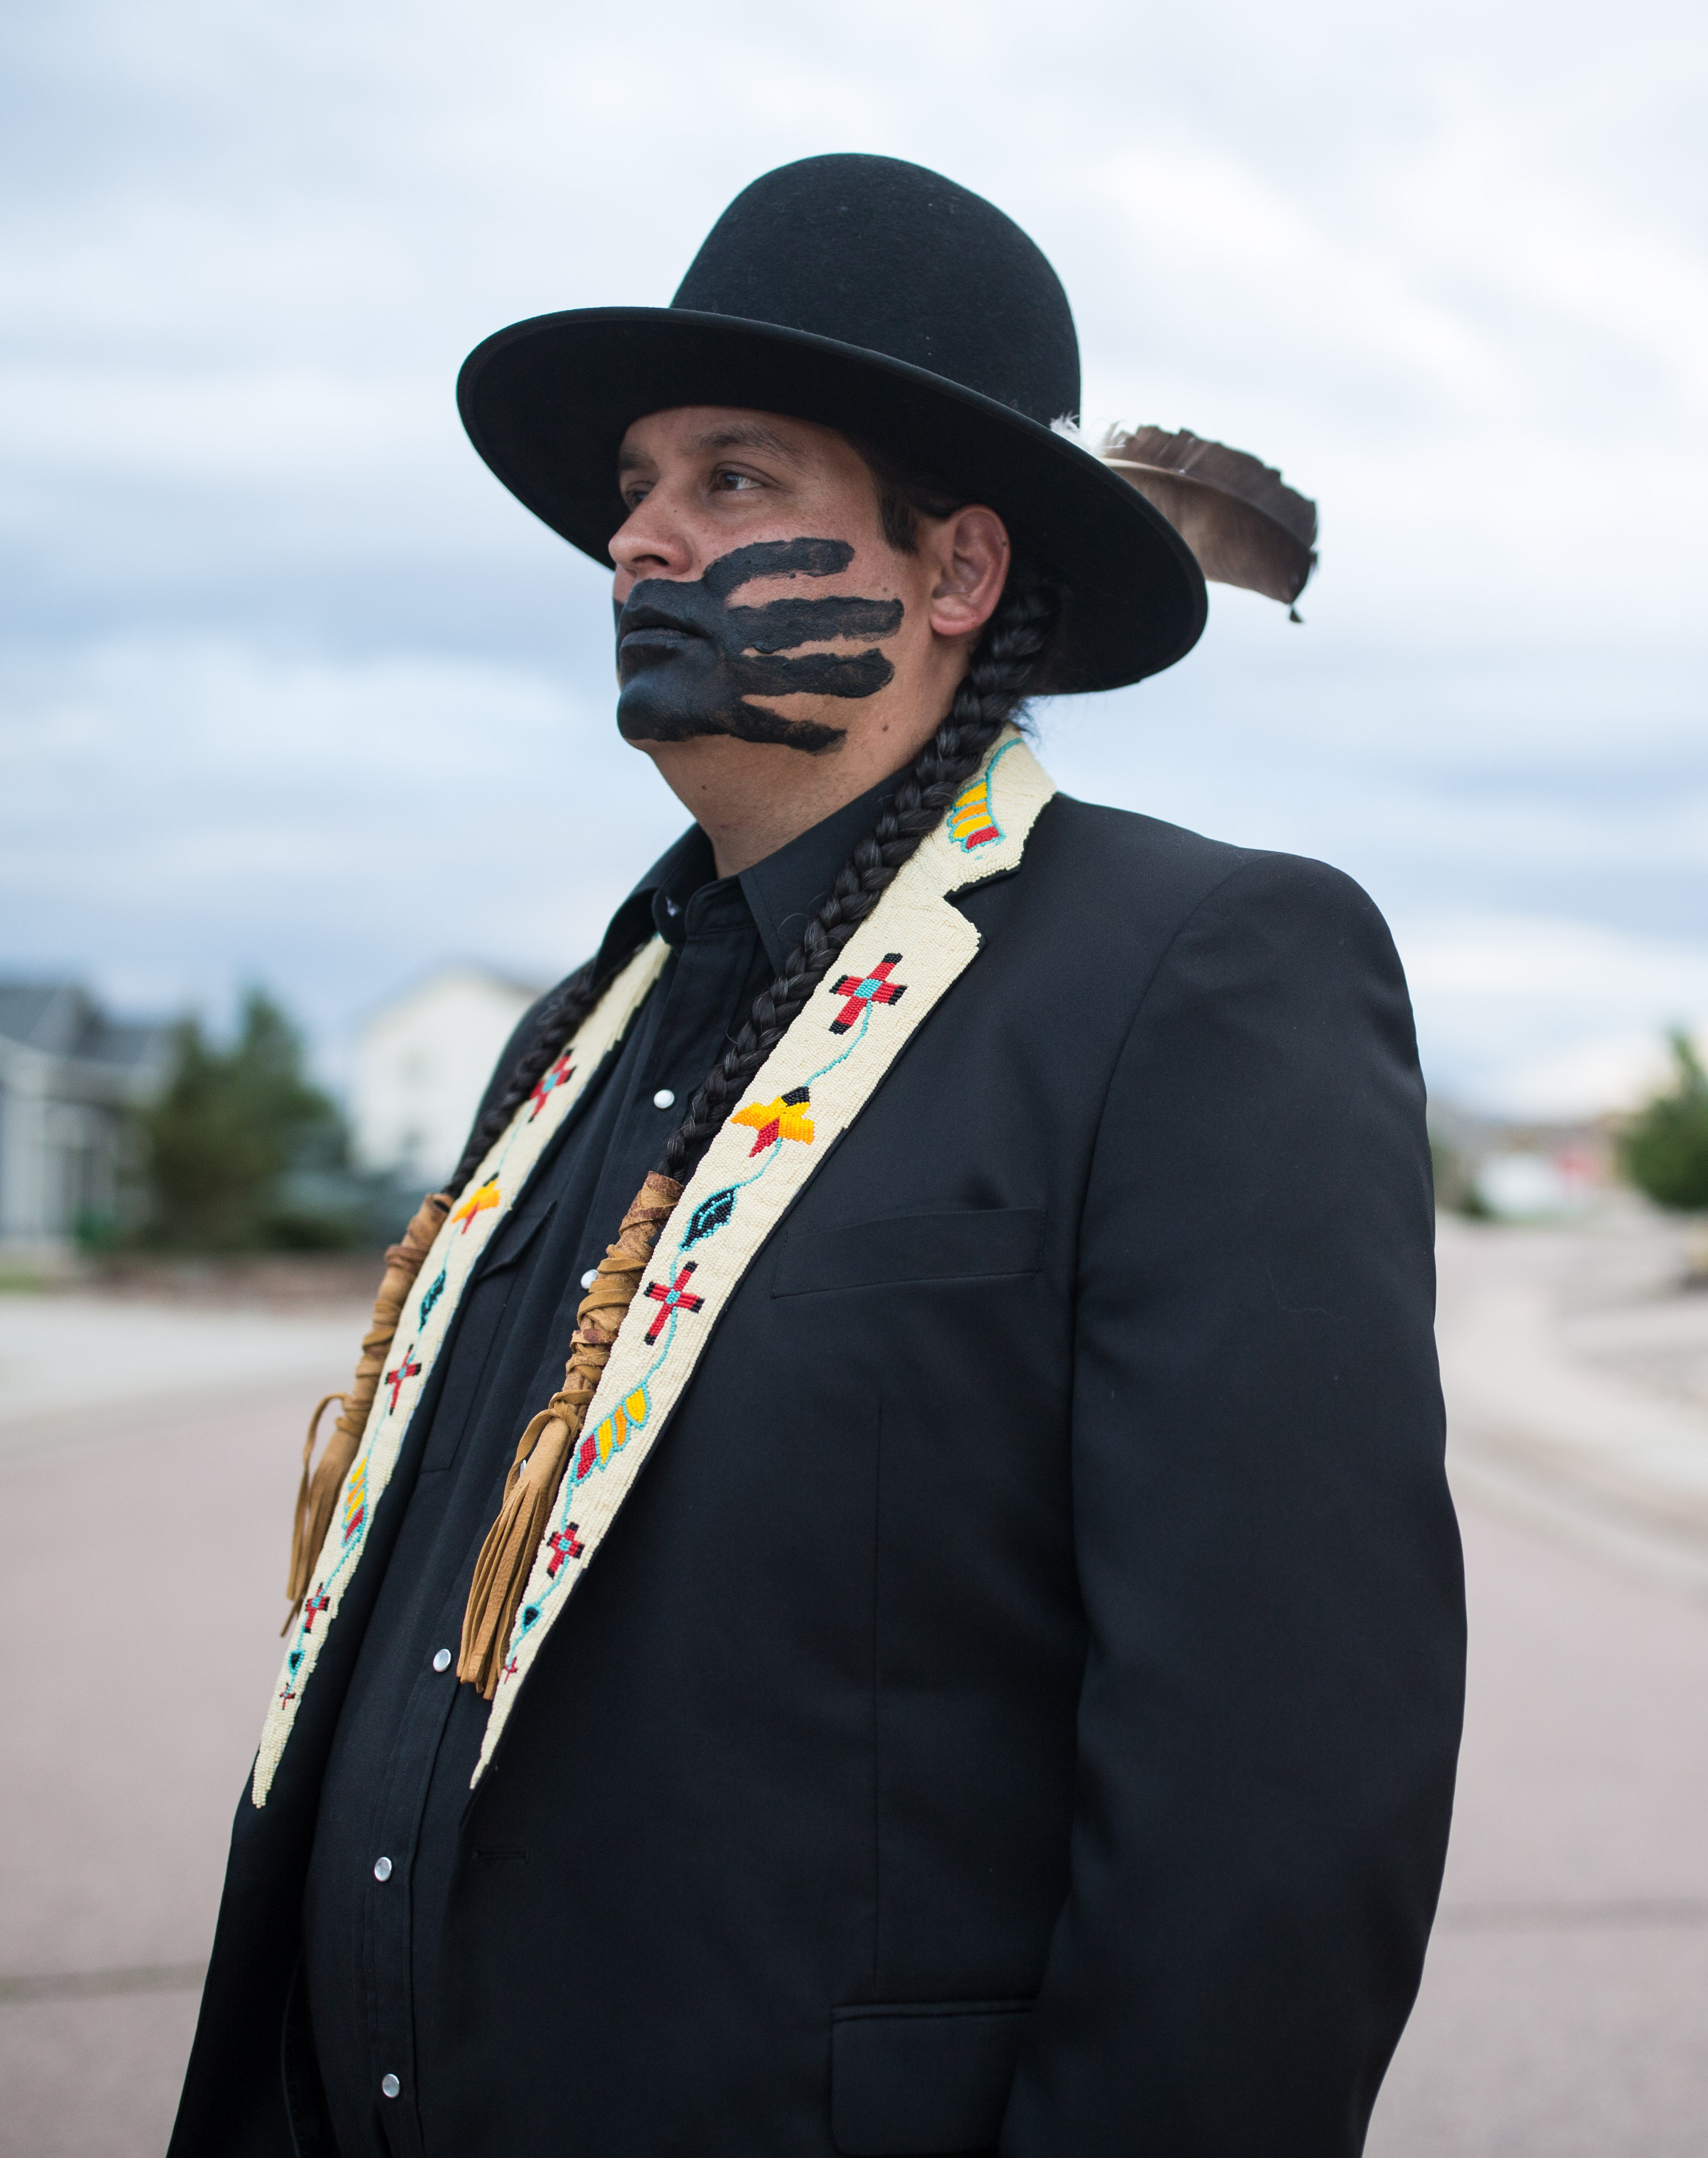 Image of artist Gregg Deal. Gregg is wearing a black full brimmed hat, and a black suit with Native American style beading on the lapels of the jacket. Gregg has a black paint handprint on his face, covering his mouth.